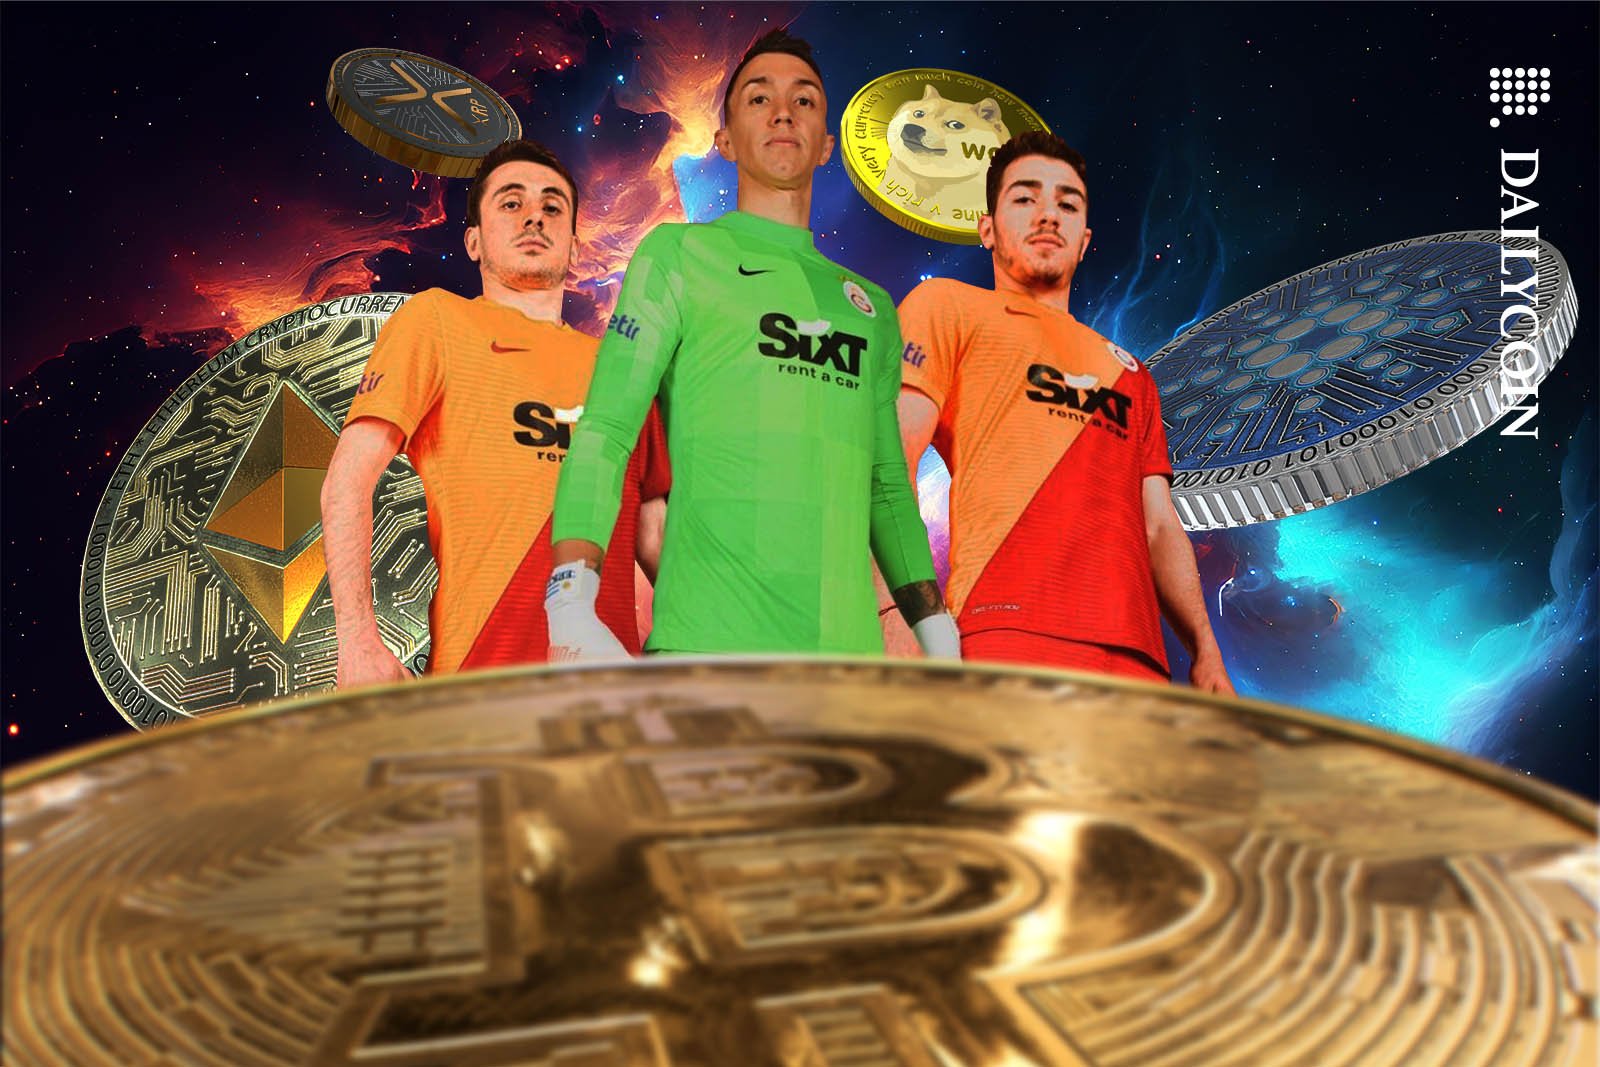 Turkish football players pozing with crypto coins in space.